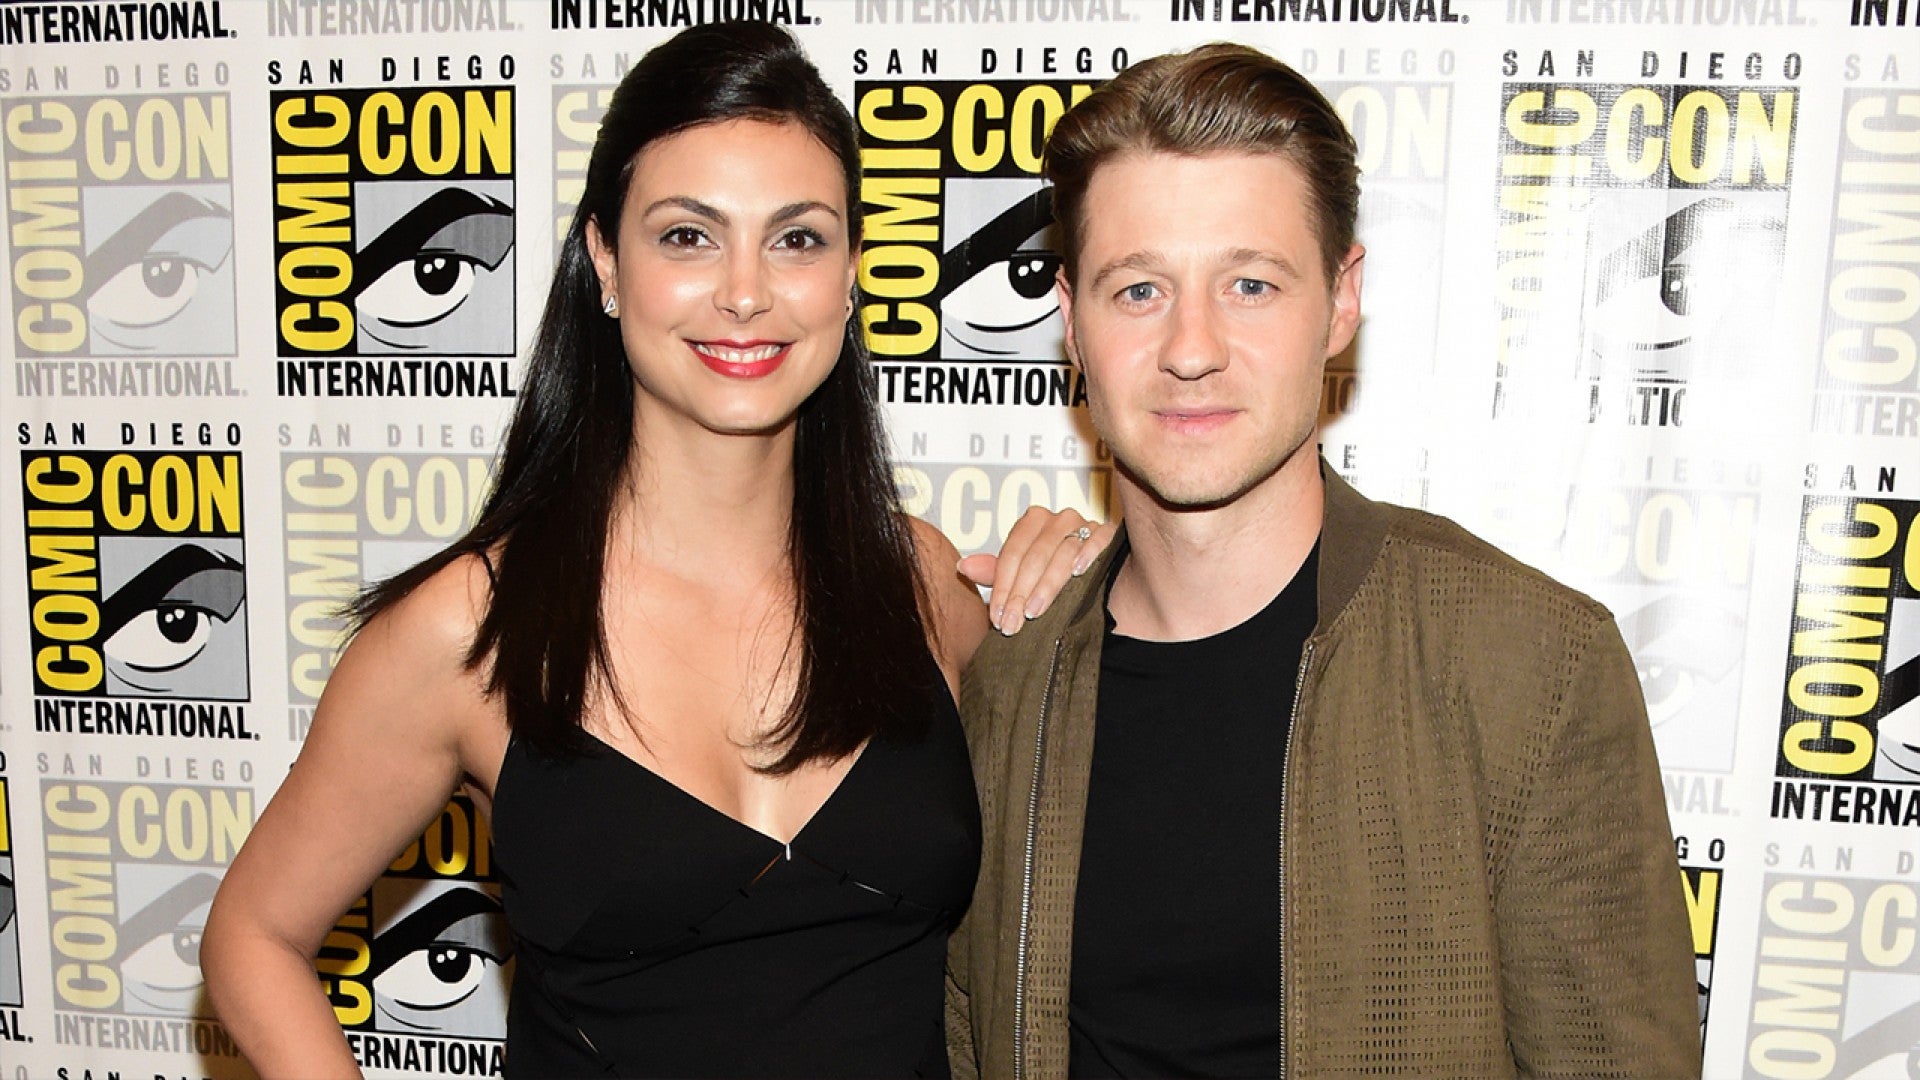 Morena Baccarin Has 'Girls Day' With She and Ben McKenzie's Daughter Frances